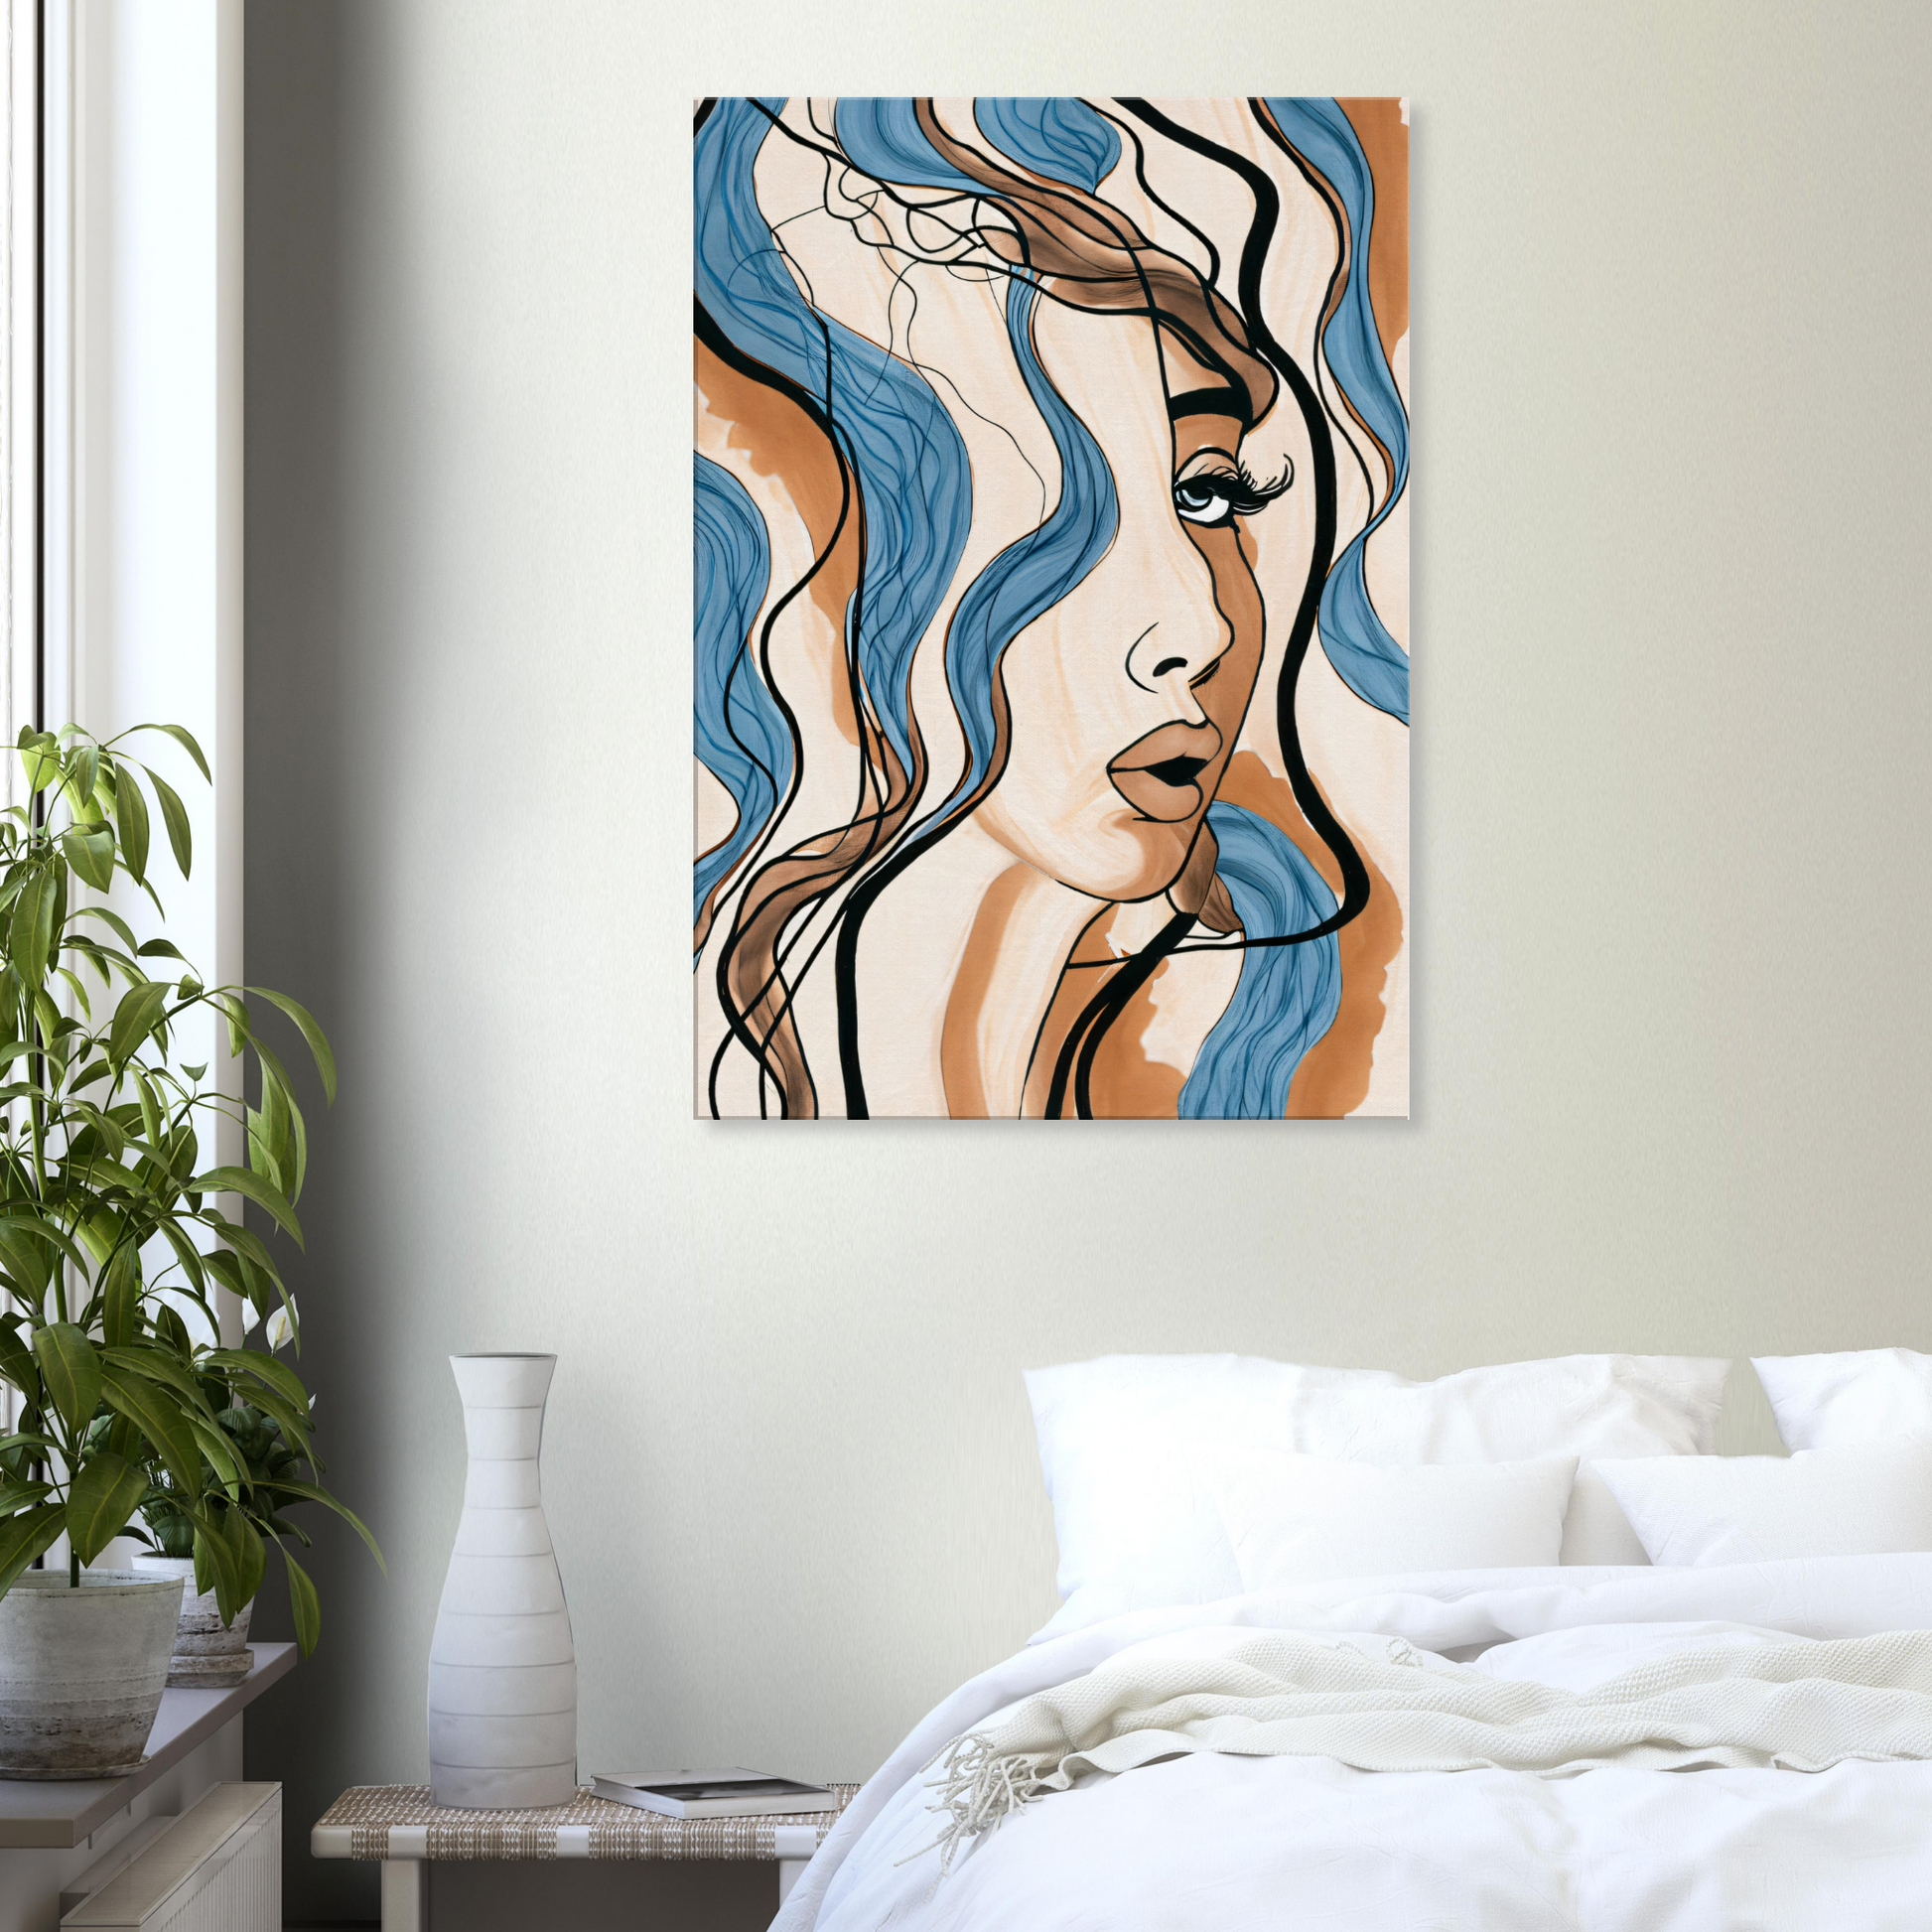 Canvas Print with line drawing of Amy Portrait by Posterify Design - Posterify